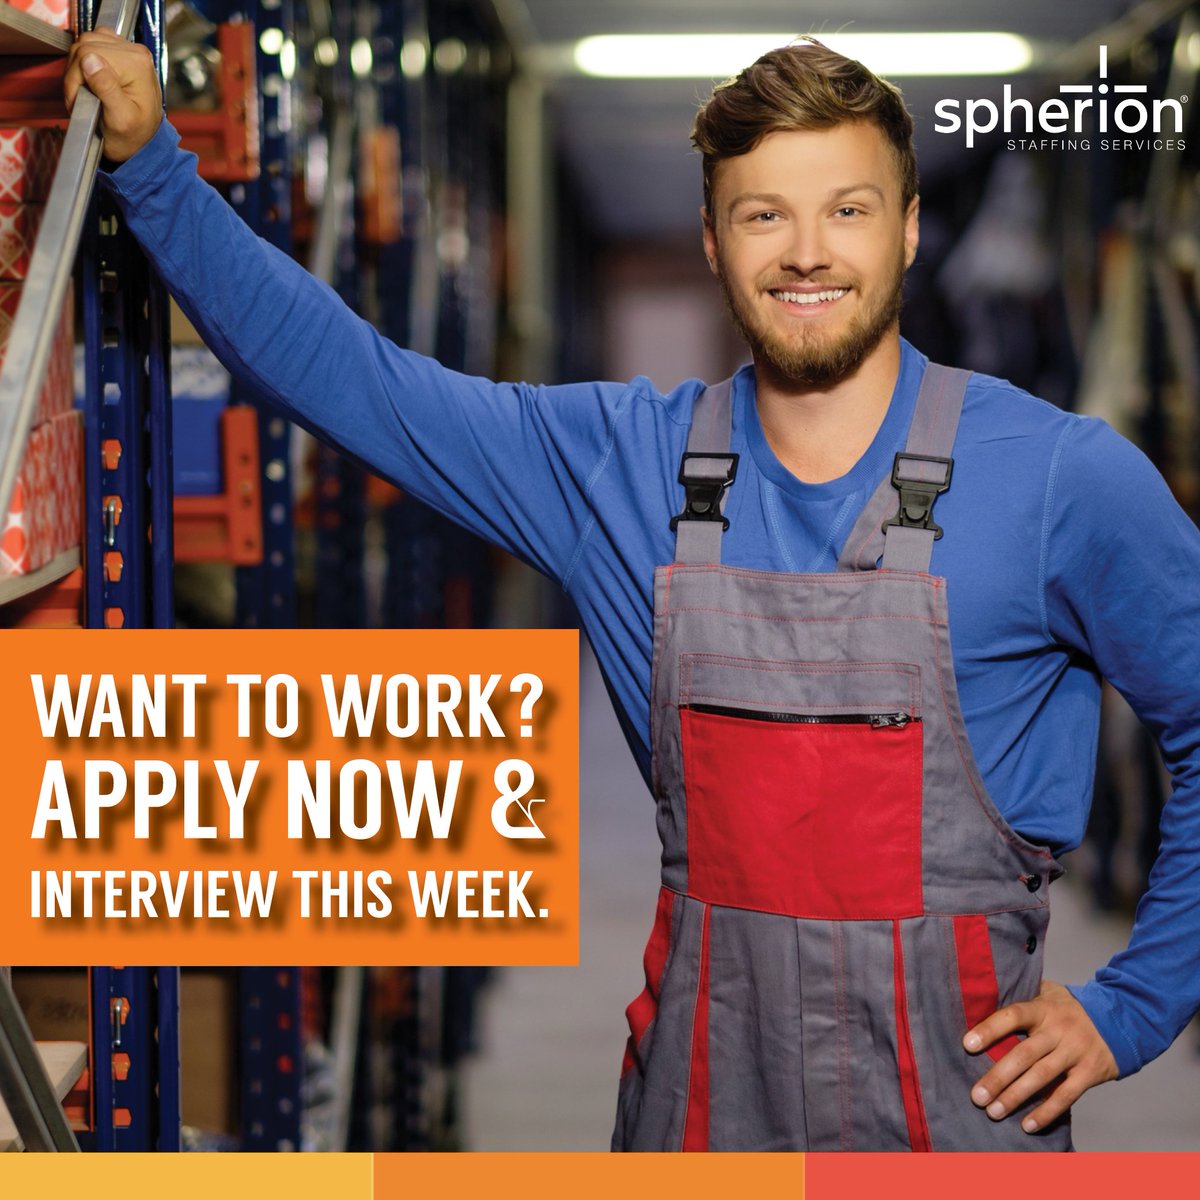 WANT TO WORK?! APPLY NOW & INTERVIEW WITH OUR TEAM. 
SIGN UP for Open Hours Interview hours: bit.ly/2N6Gjmx  #newjob #jobfair #jobinterivew #workwithspherion 
OPEN INTERVIEWS:  
Monday - Thursday | 9:30am - 1:30pm  
📍8454 Lockwood Ridge Rd
We are next to Amscot!